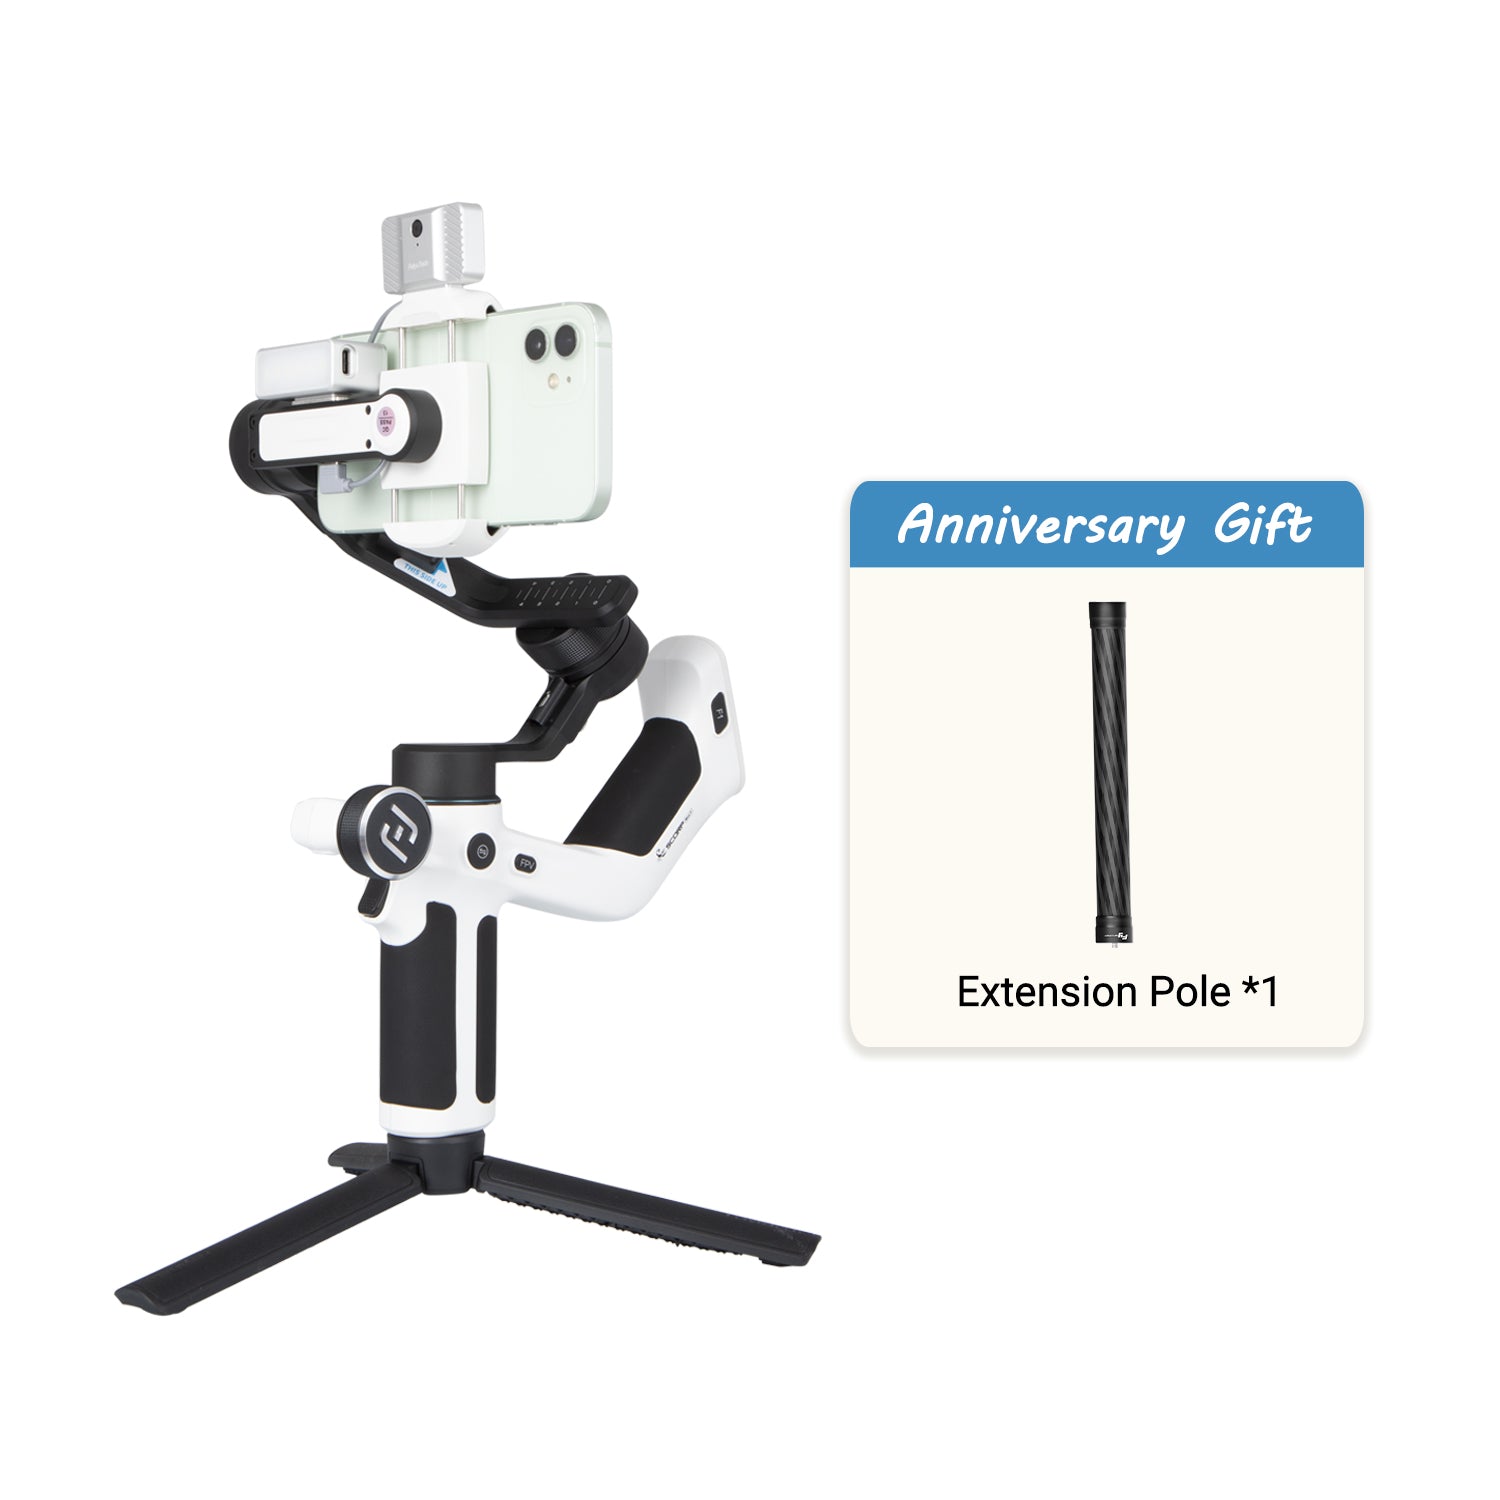 Buy SCORP Mini-P Get Free Extension Pole - Anniversary Special Offer